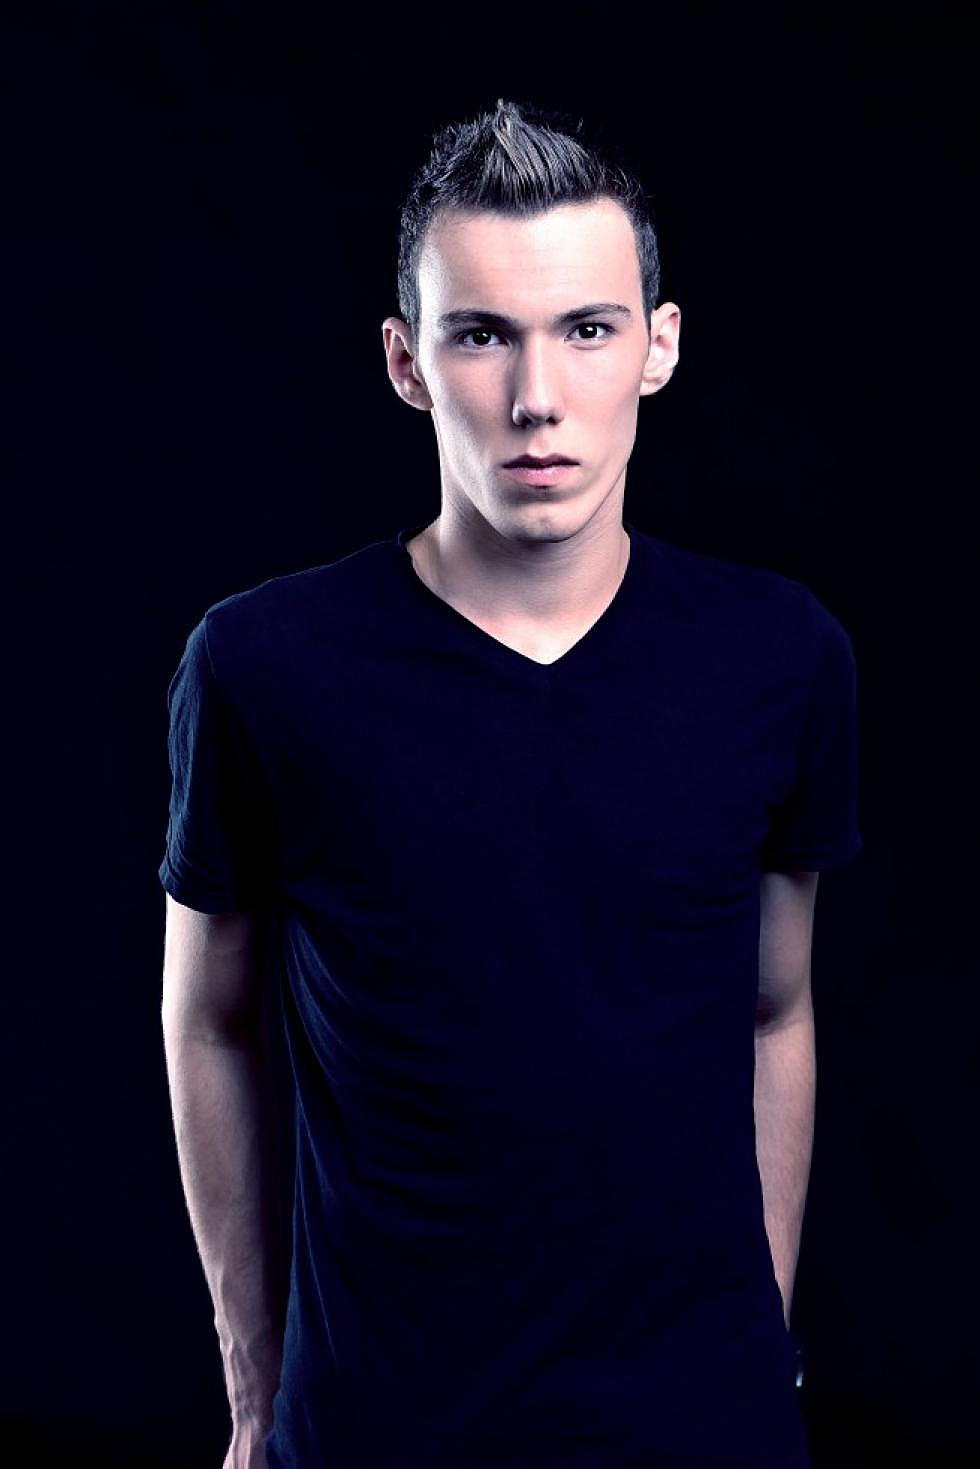 elektro exclusive interview with Tom Swoon